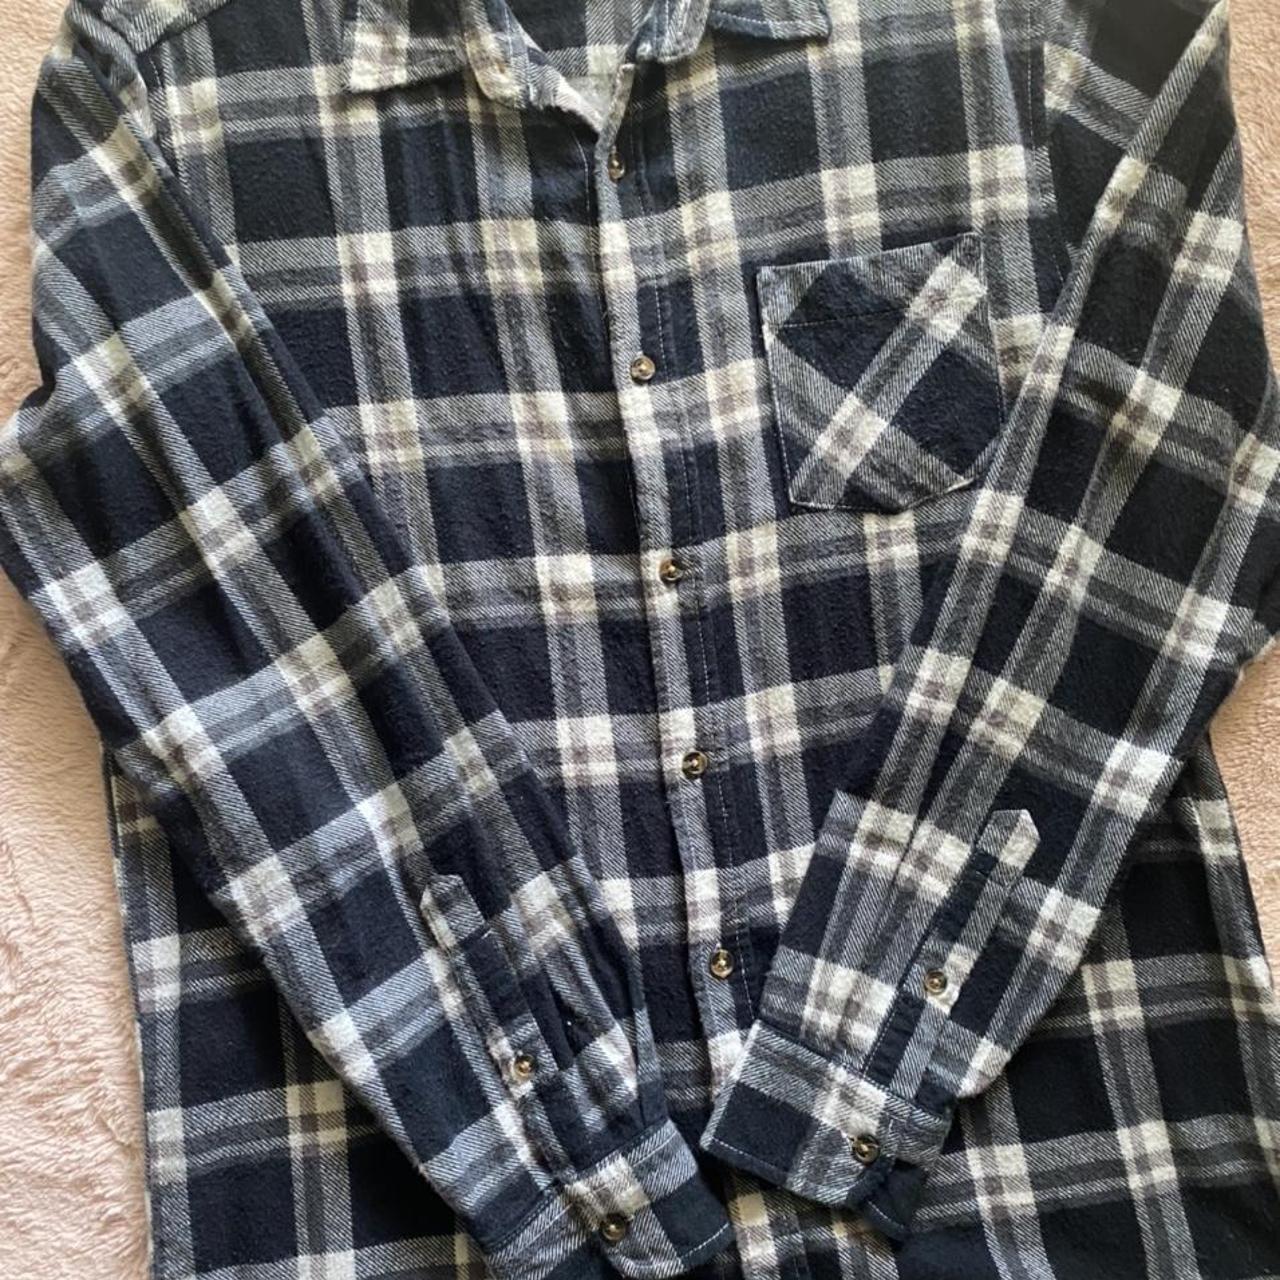 Flannel - Black and white checkered oversized... - Depop